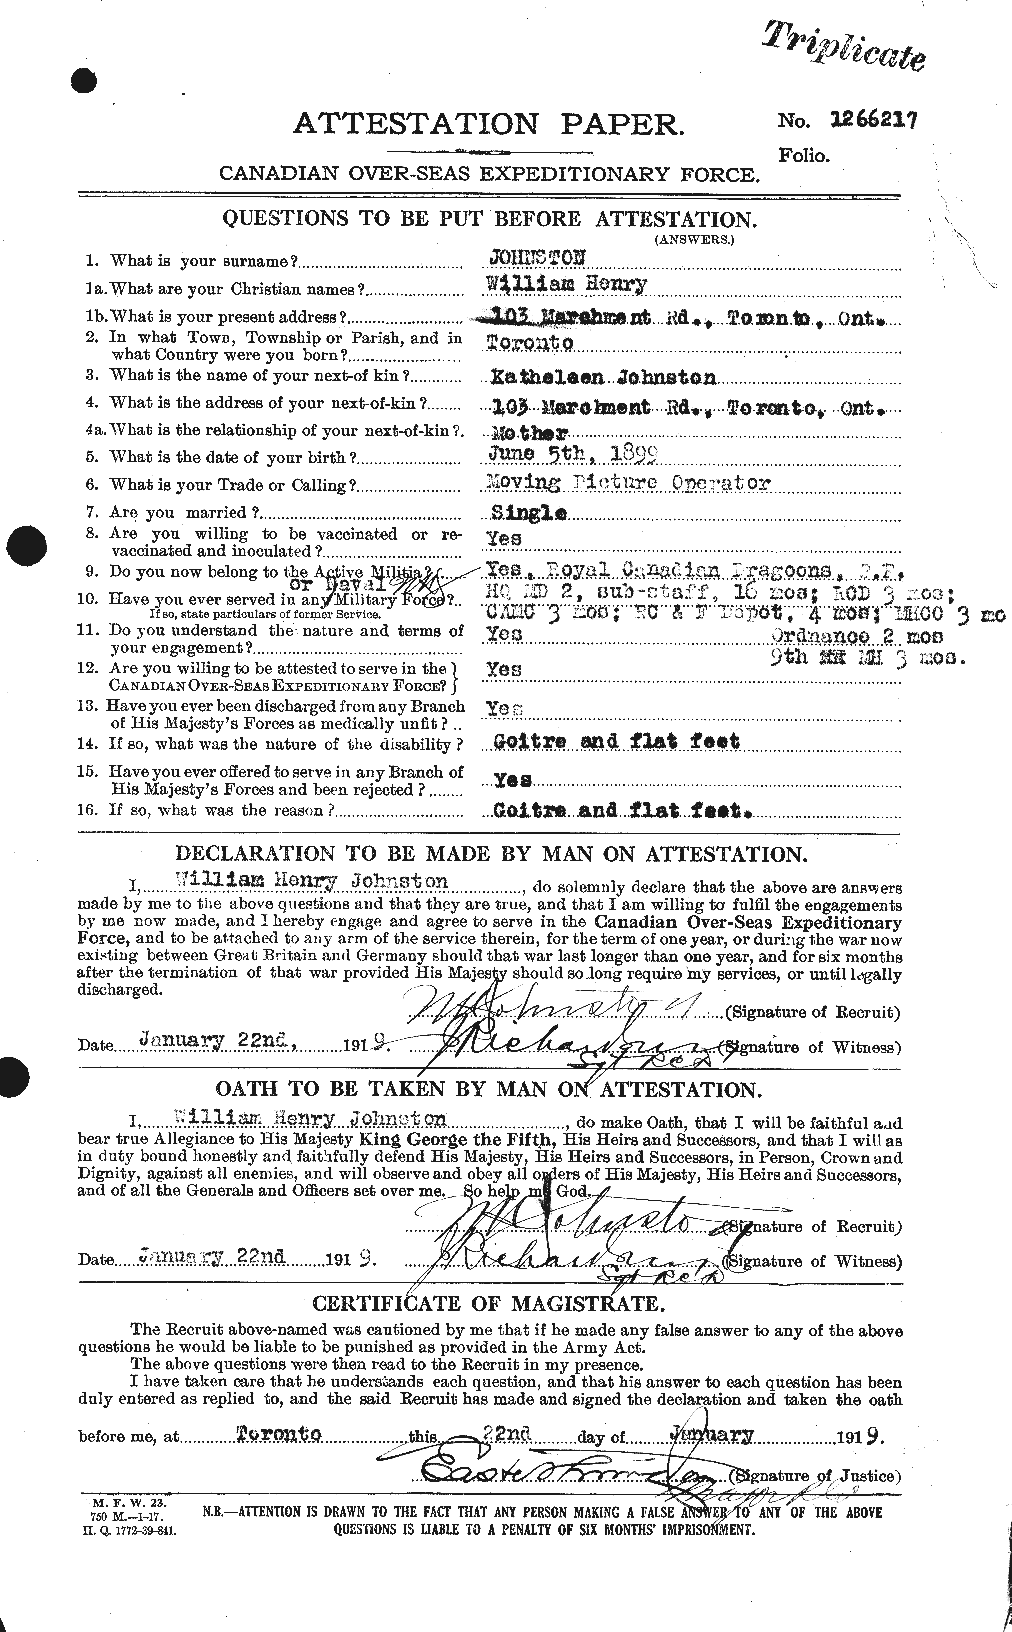 Personnel Records of the First World War - CEF 427335a